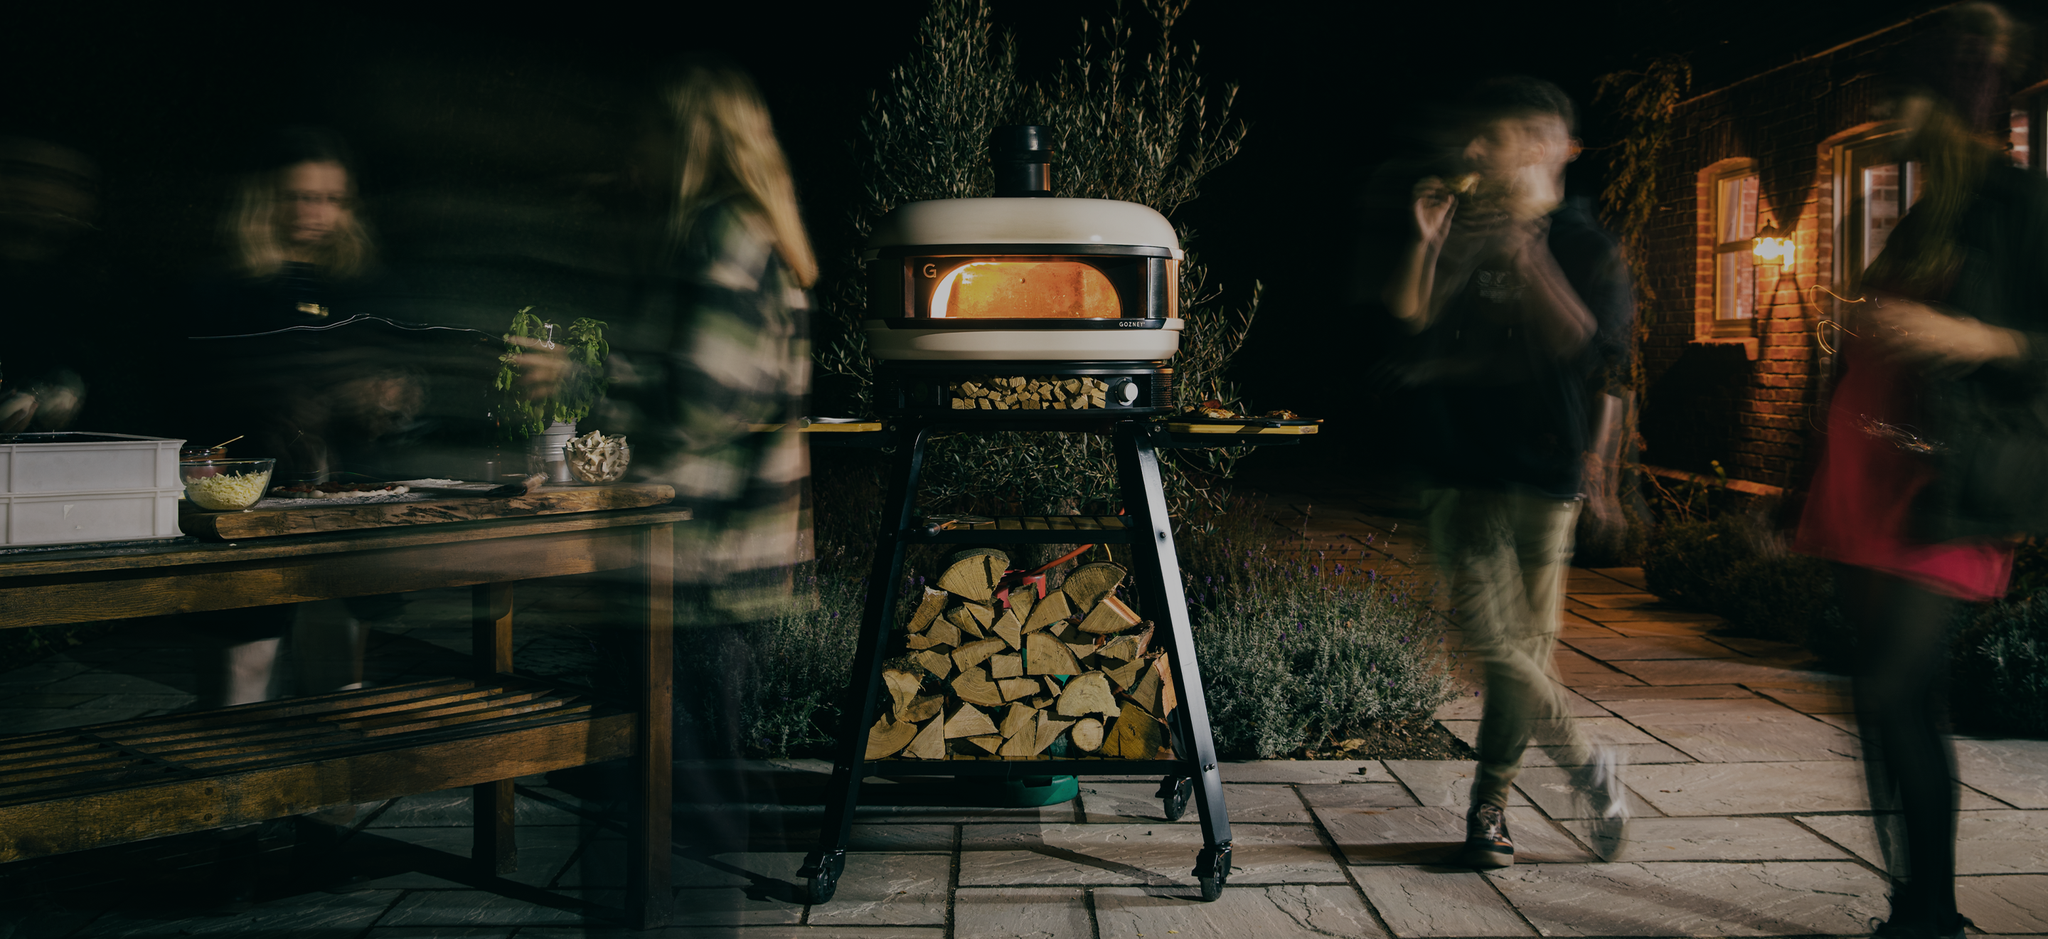 Night time pizza party with lit pizza oven